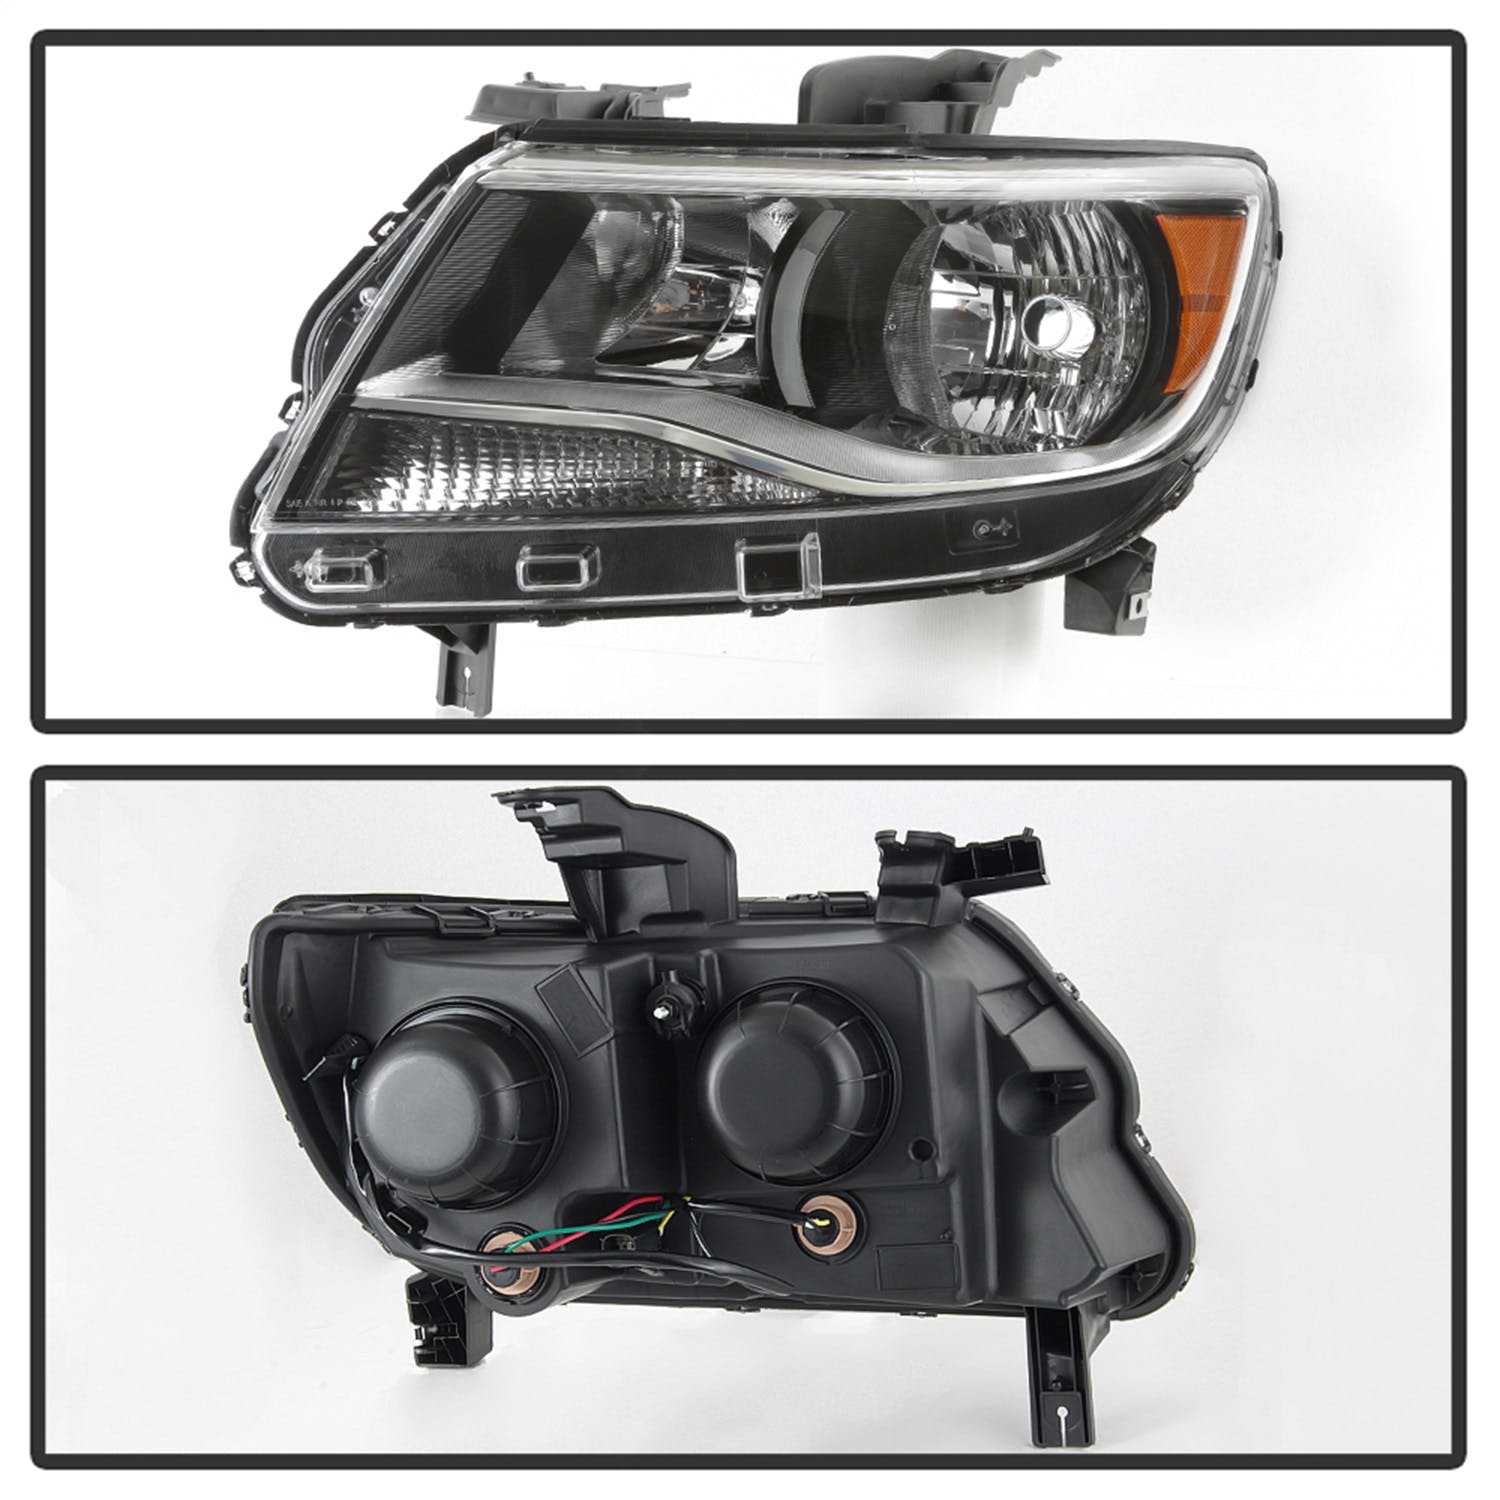 XTUNE POWER 9040535 Chevy Colorado 2015 2021 Halogen Models Only ( Does Not fit Xenon HID and Projector Models ) Driver Side Headlights Low Beam H11(Included) ; High Beam 9005(Included) ; Signal 7444NA(Not Included) OEM Left